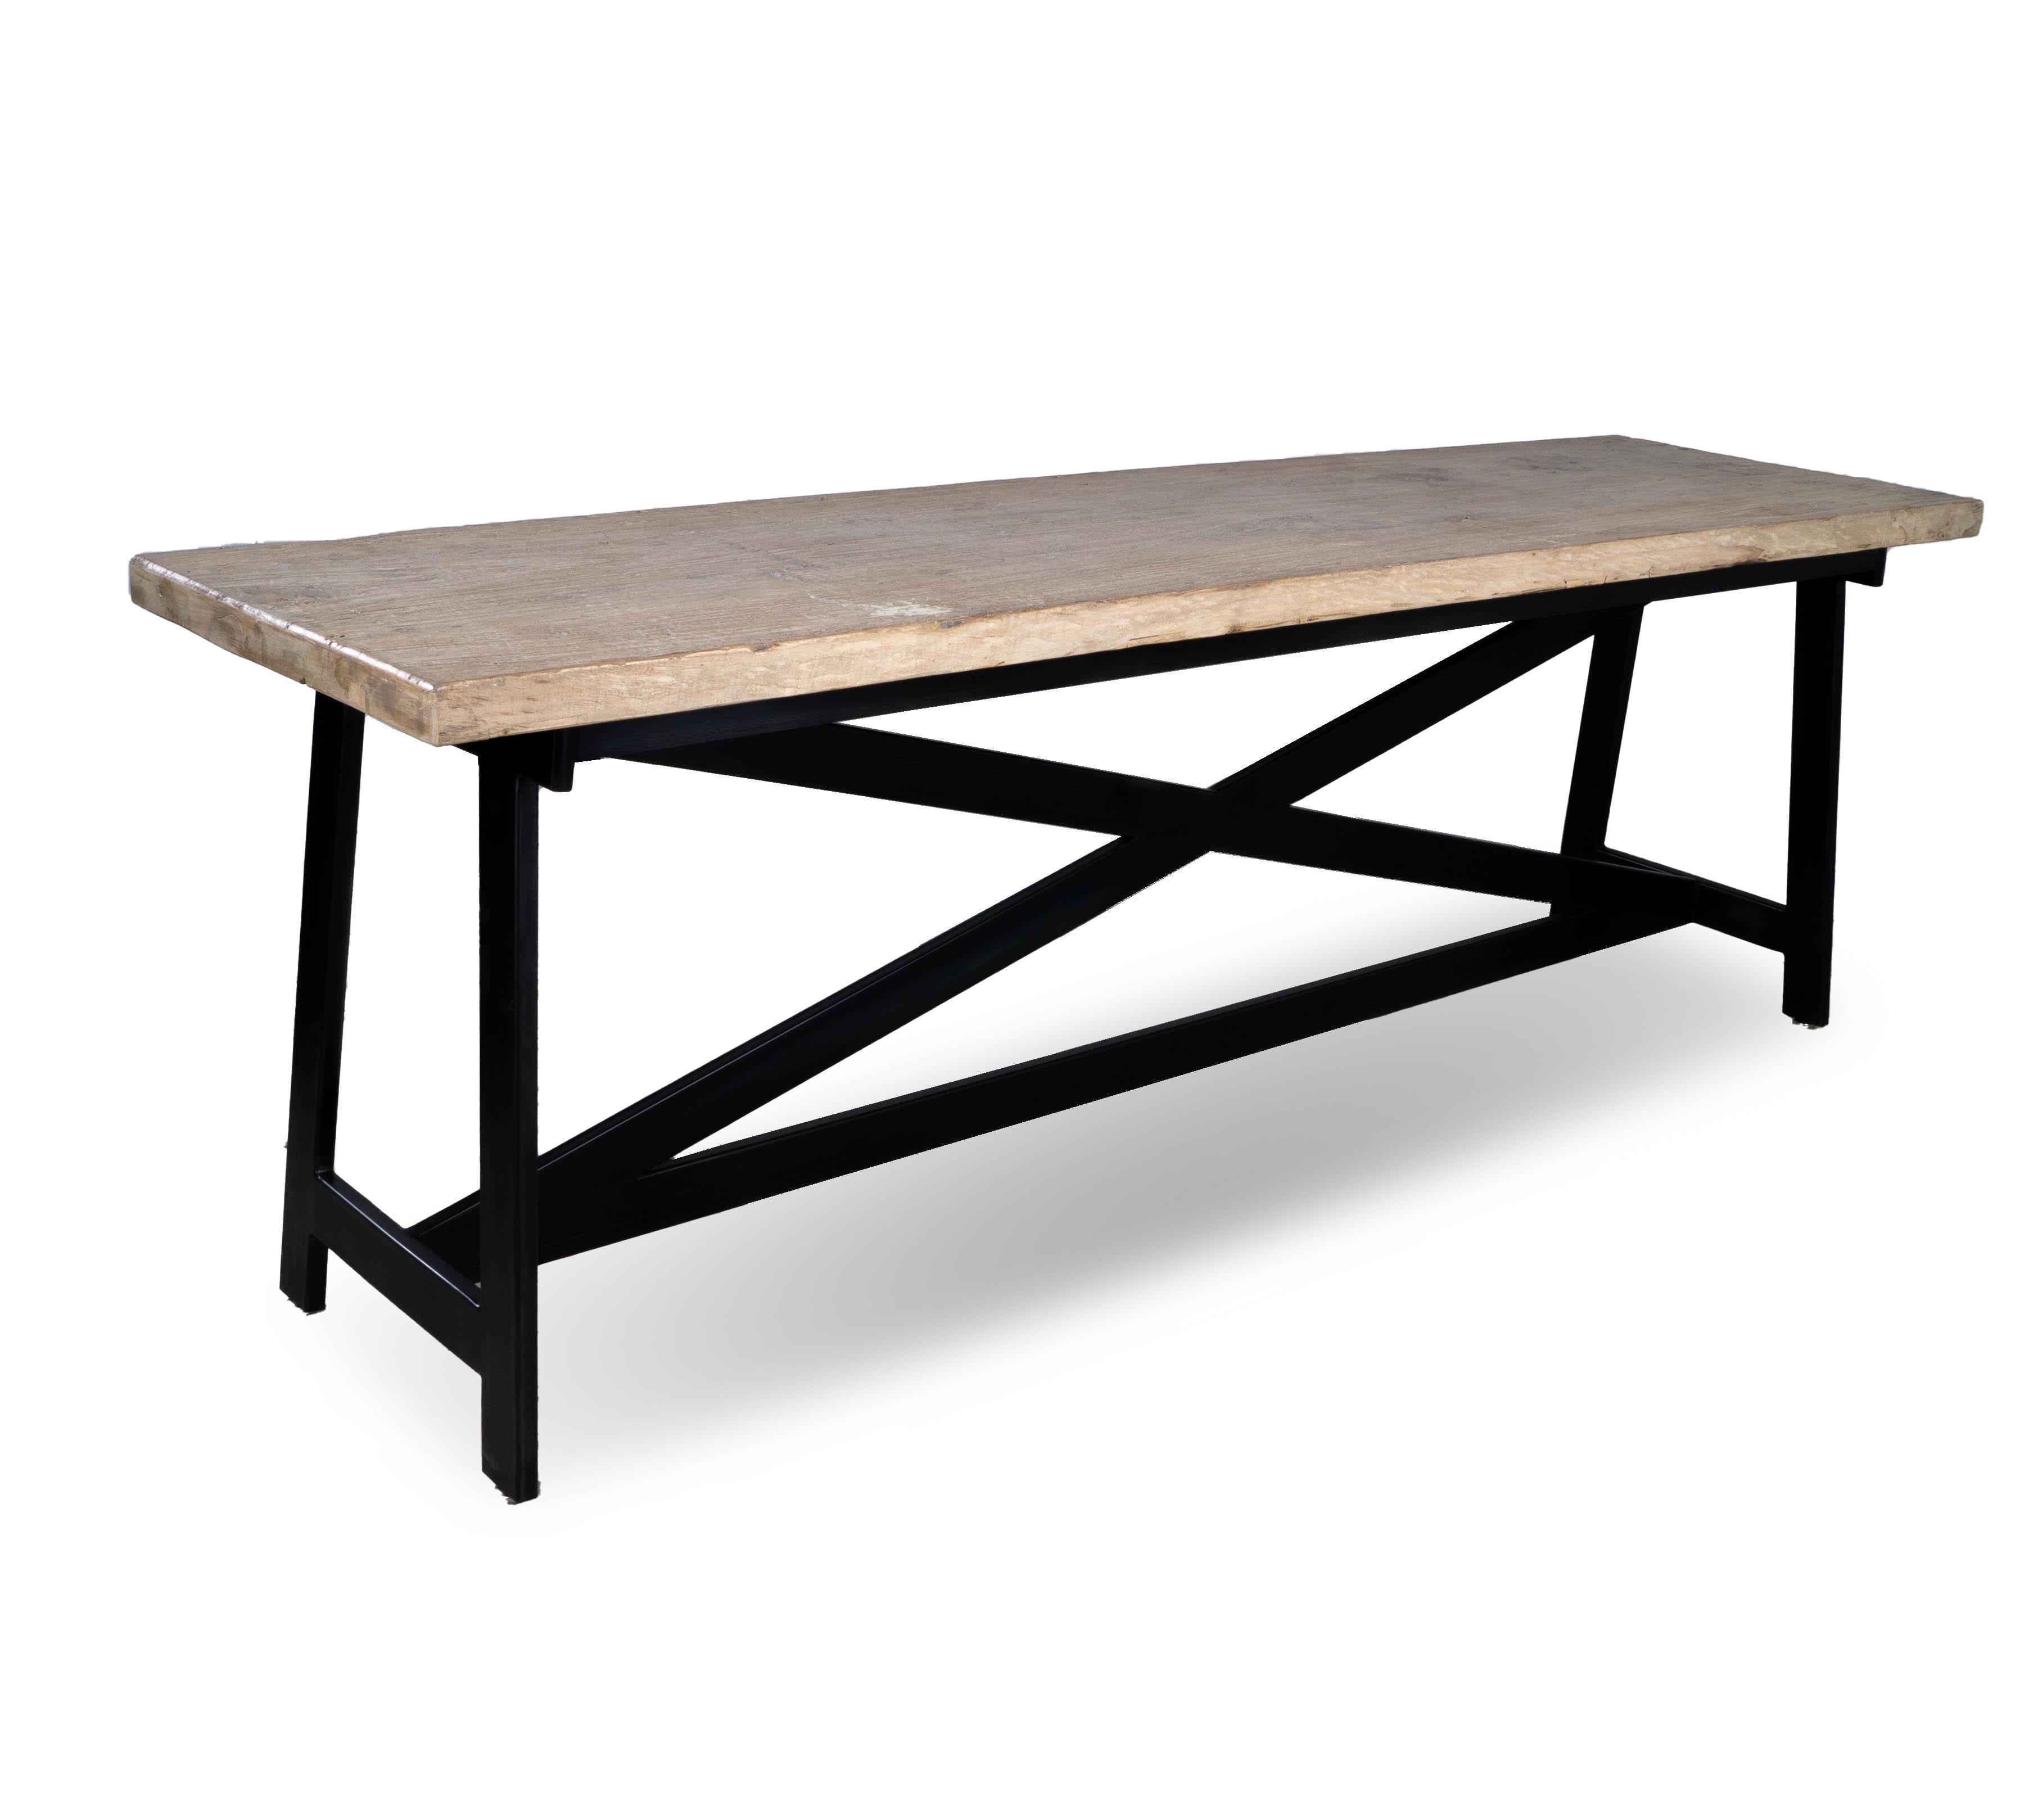 Add a touch of natural beauty and rustic charm to your modern home decor with the Reclaimed Elm Console. Handcrafted with a X stretcher steel sase and a reclaimed and bleached elm top, this console brings timeless elegance to any space. Its